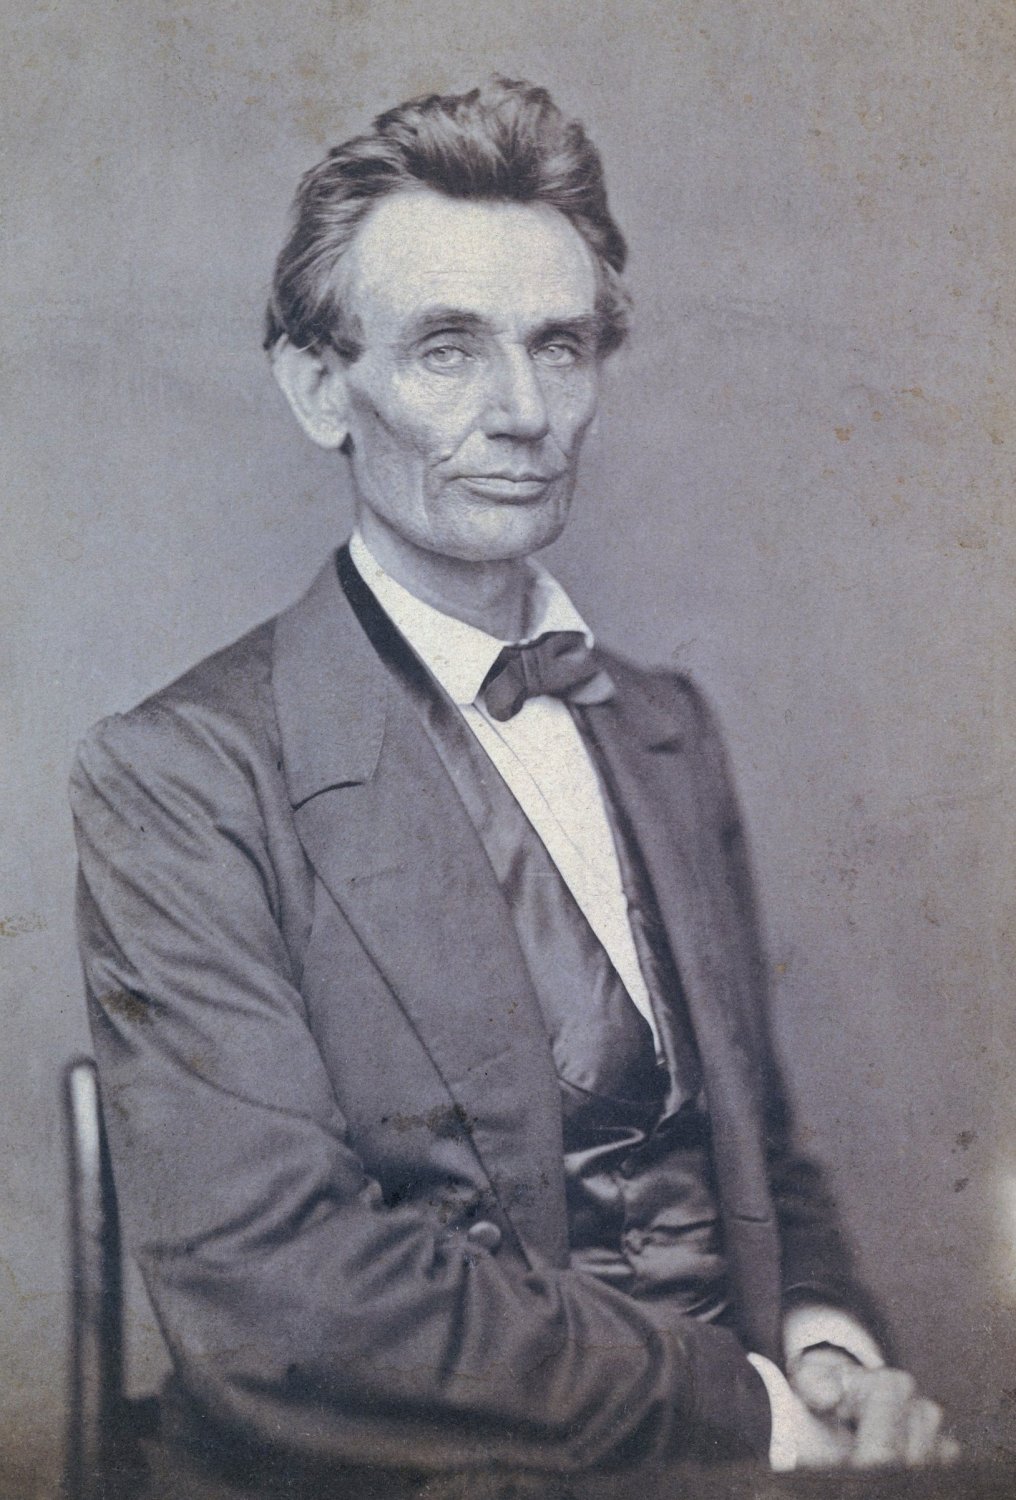 Lincoln Opposed to Negro Equality